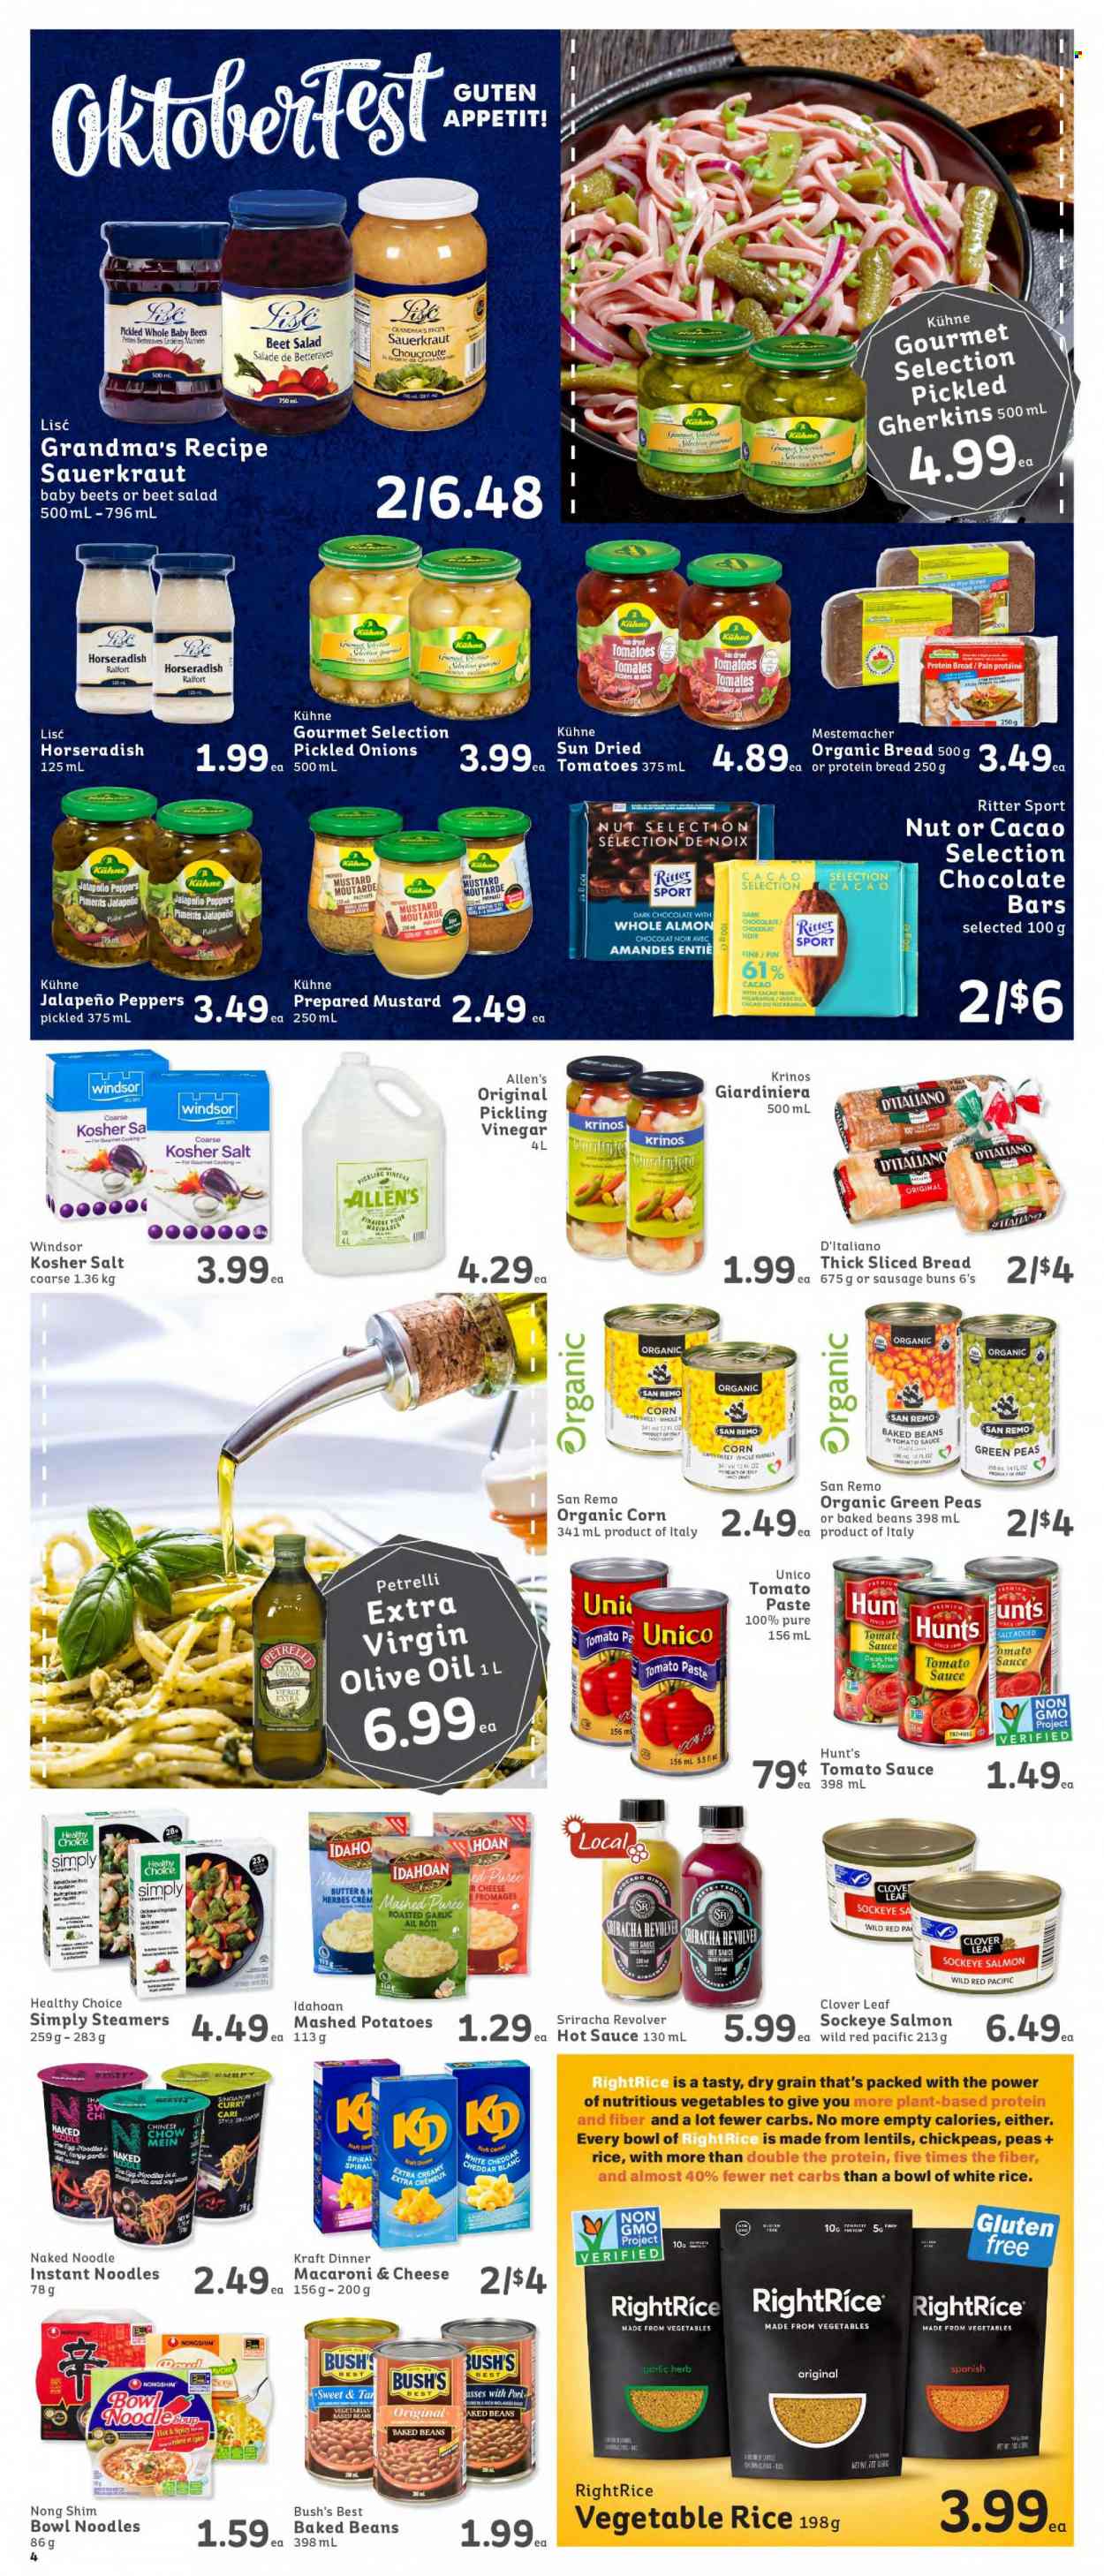 thumbnail - IGA Simple Goodness Flyer - September 24, 2021 - September 30, 2021 - Sales products - bread, buns, beans, corn, horseradish, onion, jalapeño, avocado, salmon, macaroni & cheese, mashed potatoes, instant noodles, noodles, Healthy Choice, Kraft®, Clover, eggs, butter, dark chocolate, Ritter Sport, chocolate bar, lentils, sauerkraut, tomato paste, baked beans, chickpeas, white rice, cloves, mustard, sriracha, hot sauce, extra virgin olive oil, vinegar, olive oil, oil, molasses. Page 5.